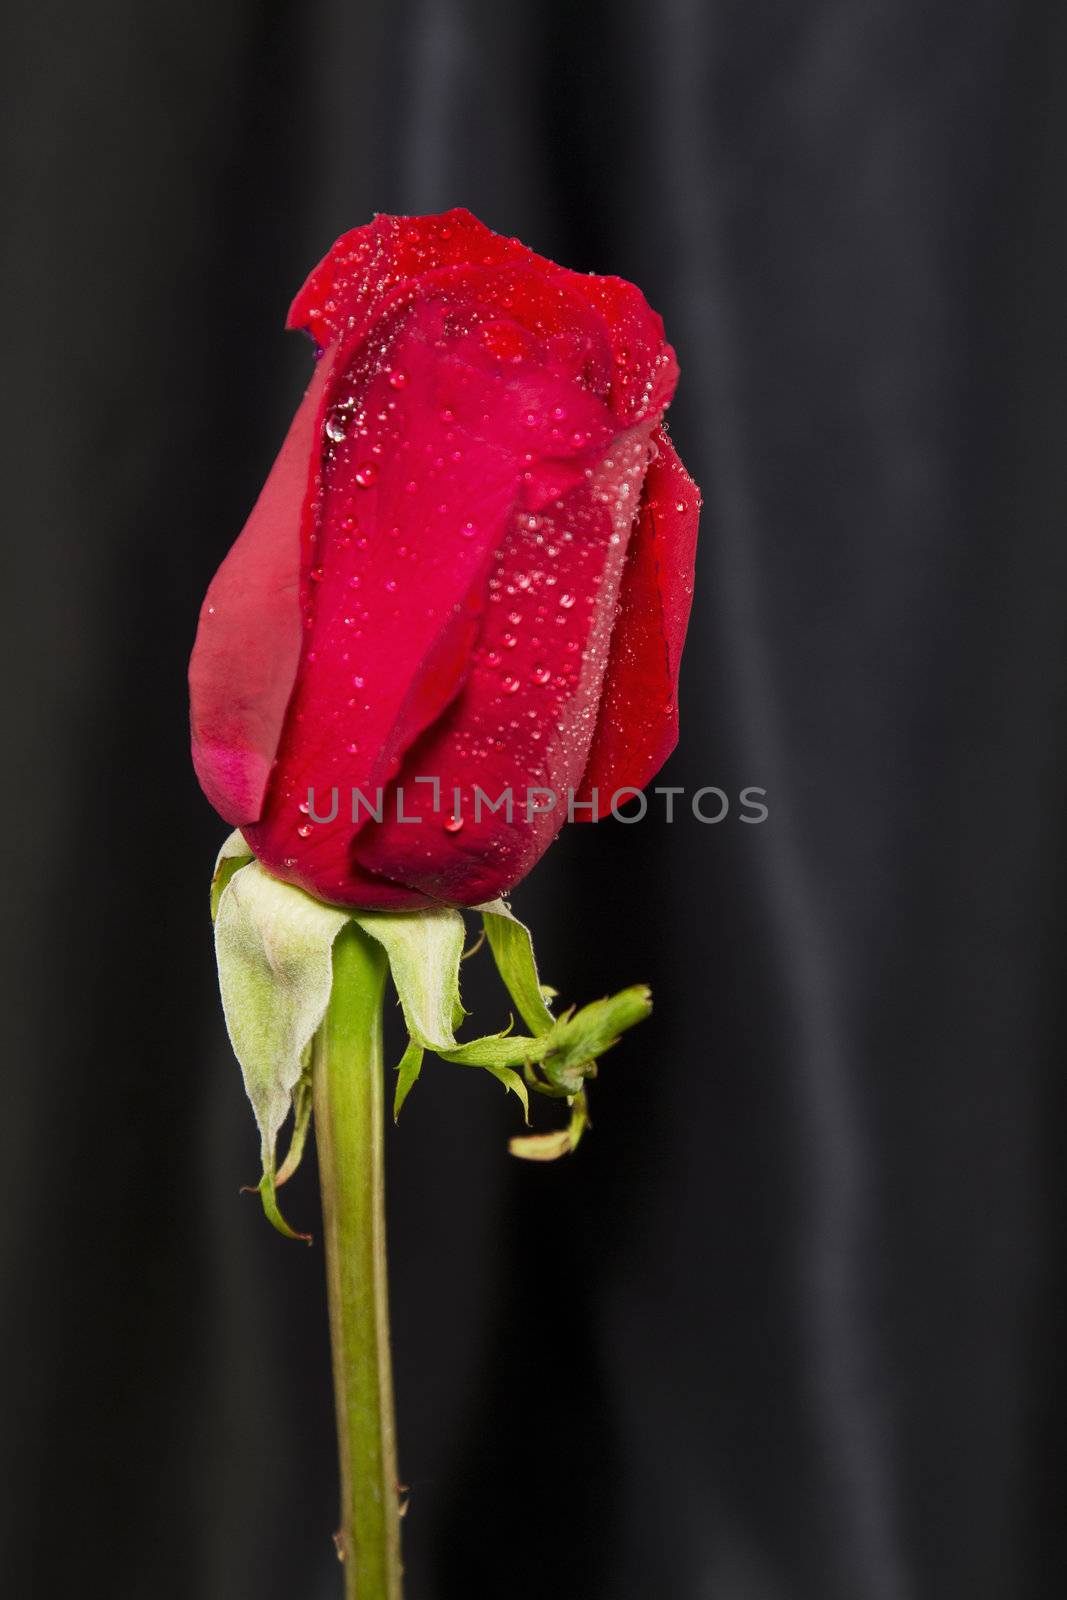 A red rose with water drops against flowing, black satin